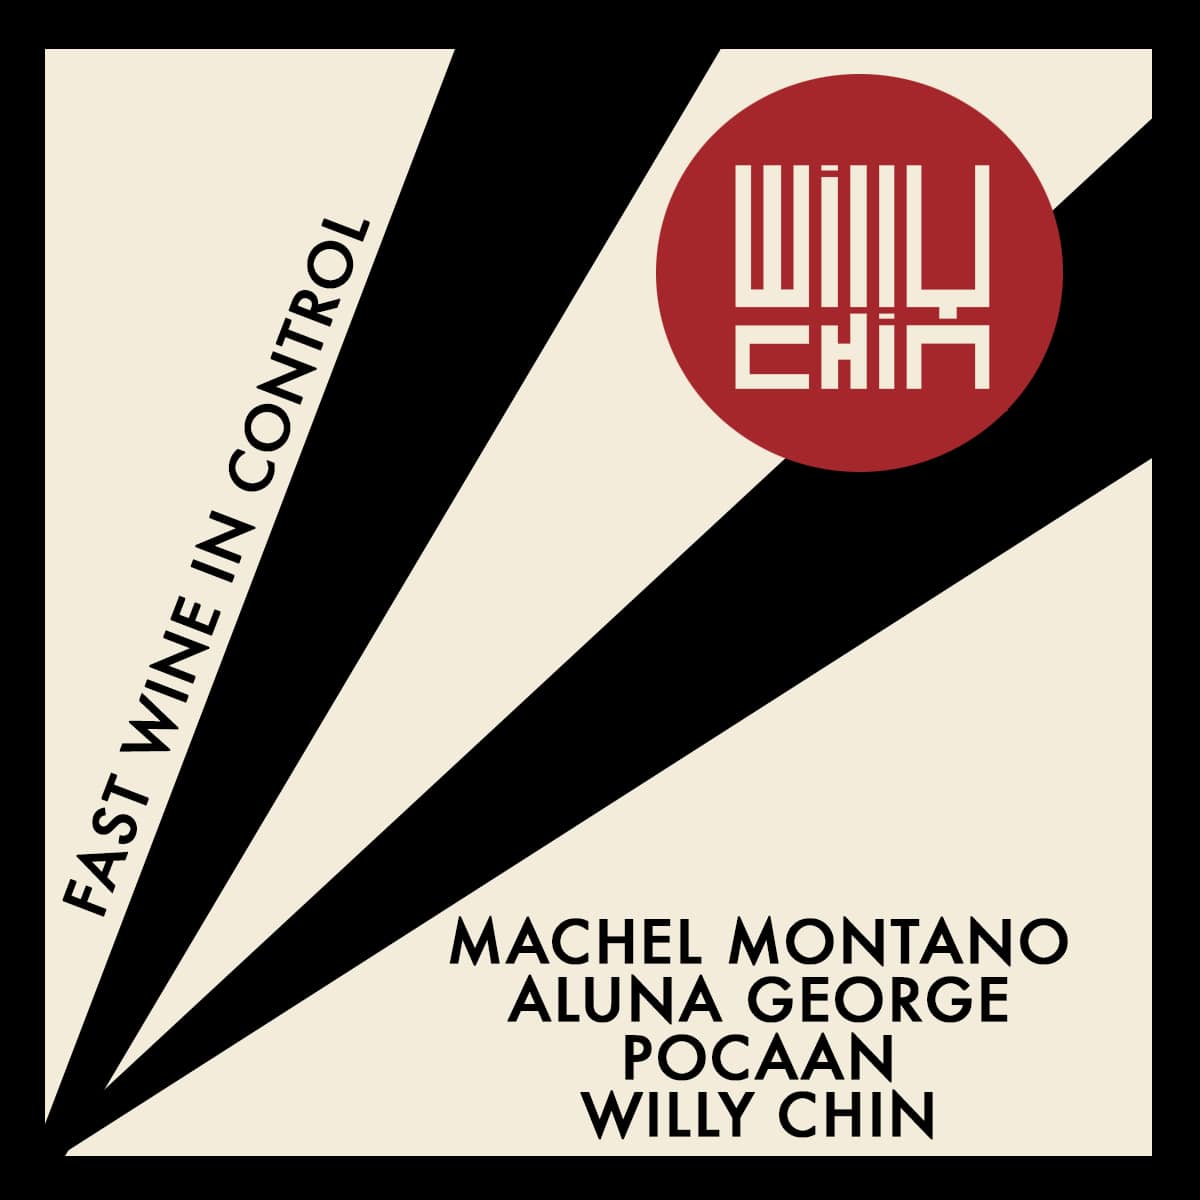 Machel Montano - Fast Wine In Control - Willy Chin Remix